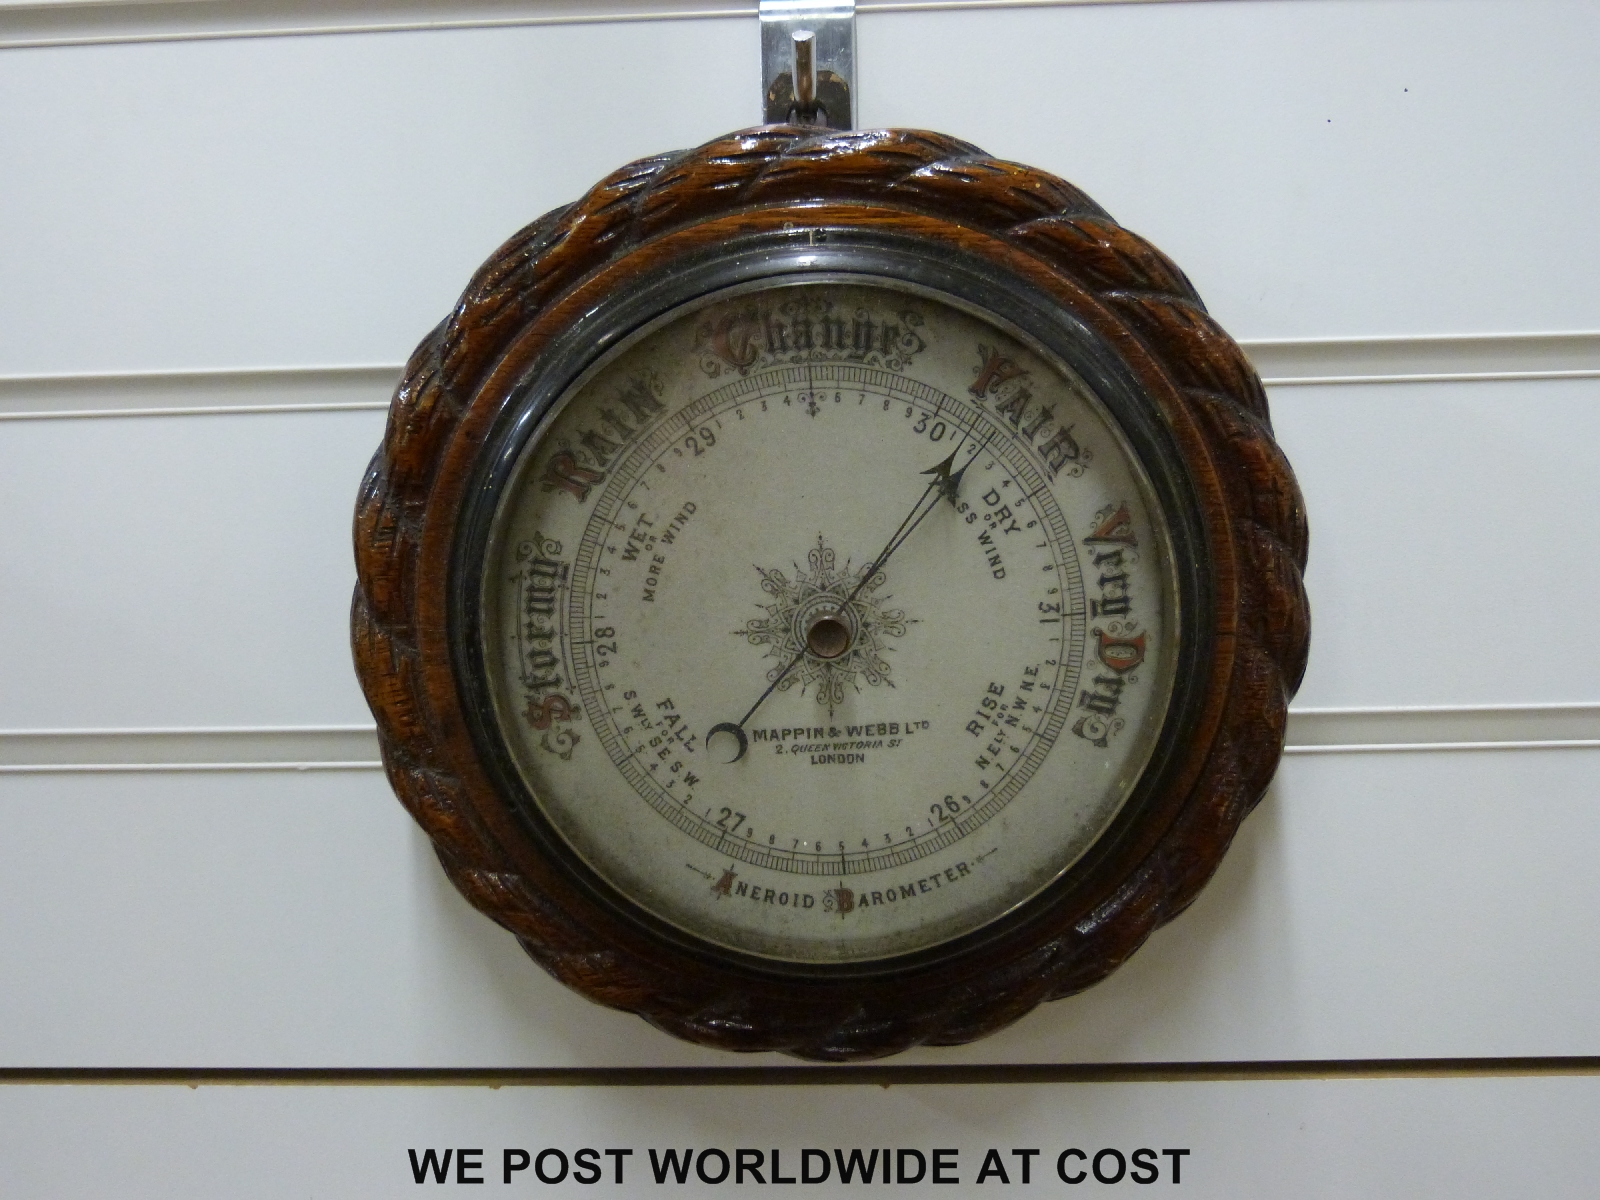 A Mappin & Webb carved oak cased circular aneroid barometer (16cm diameter dial) - Image 2 of 2